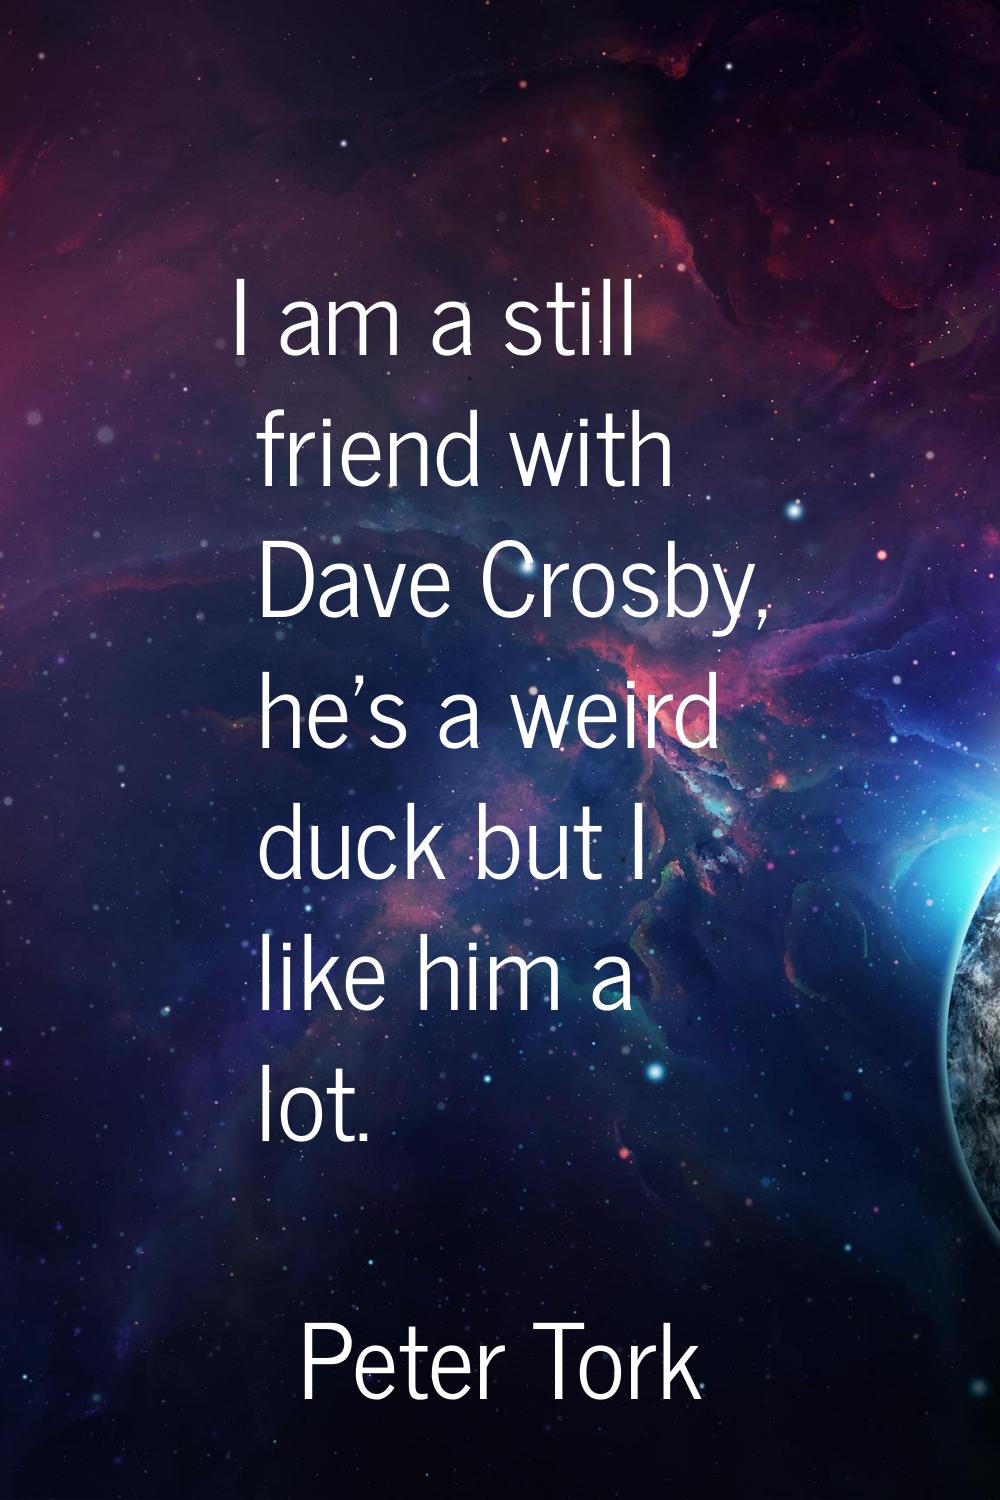 I am a still friend with Dave Crosby, he's a weird duck but I like him a lot.